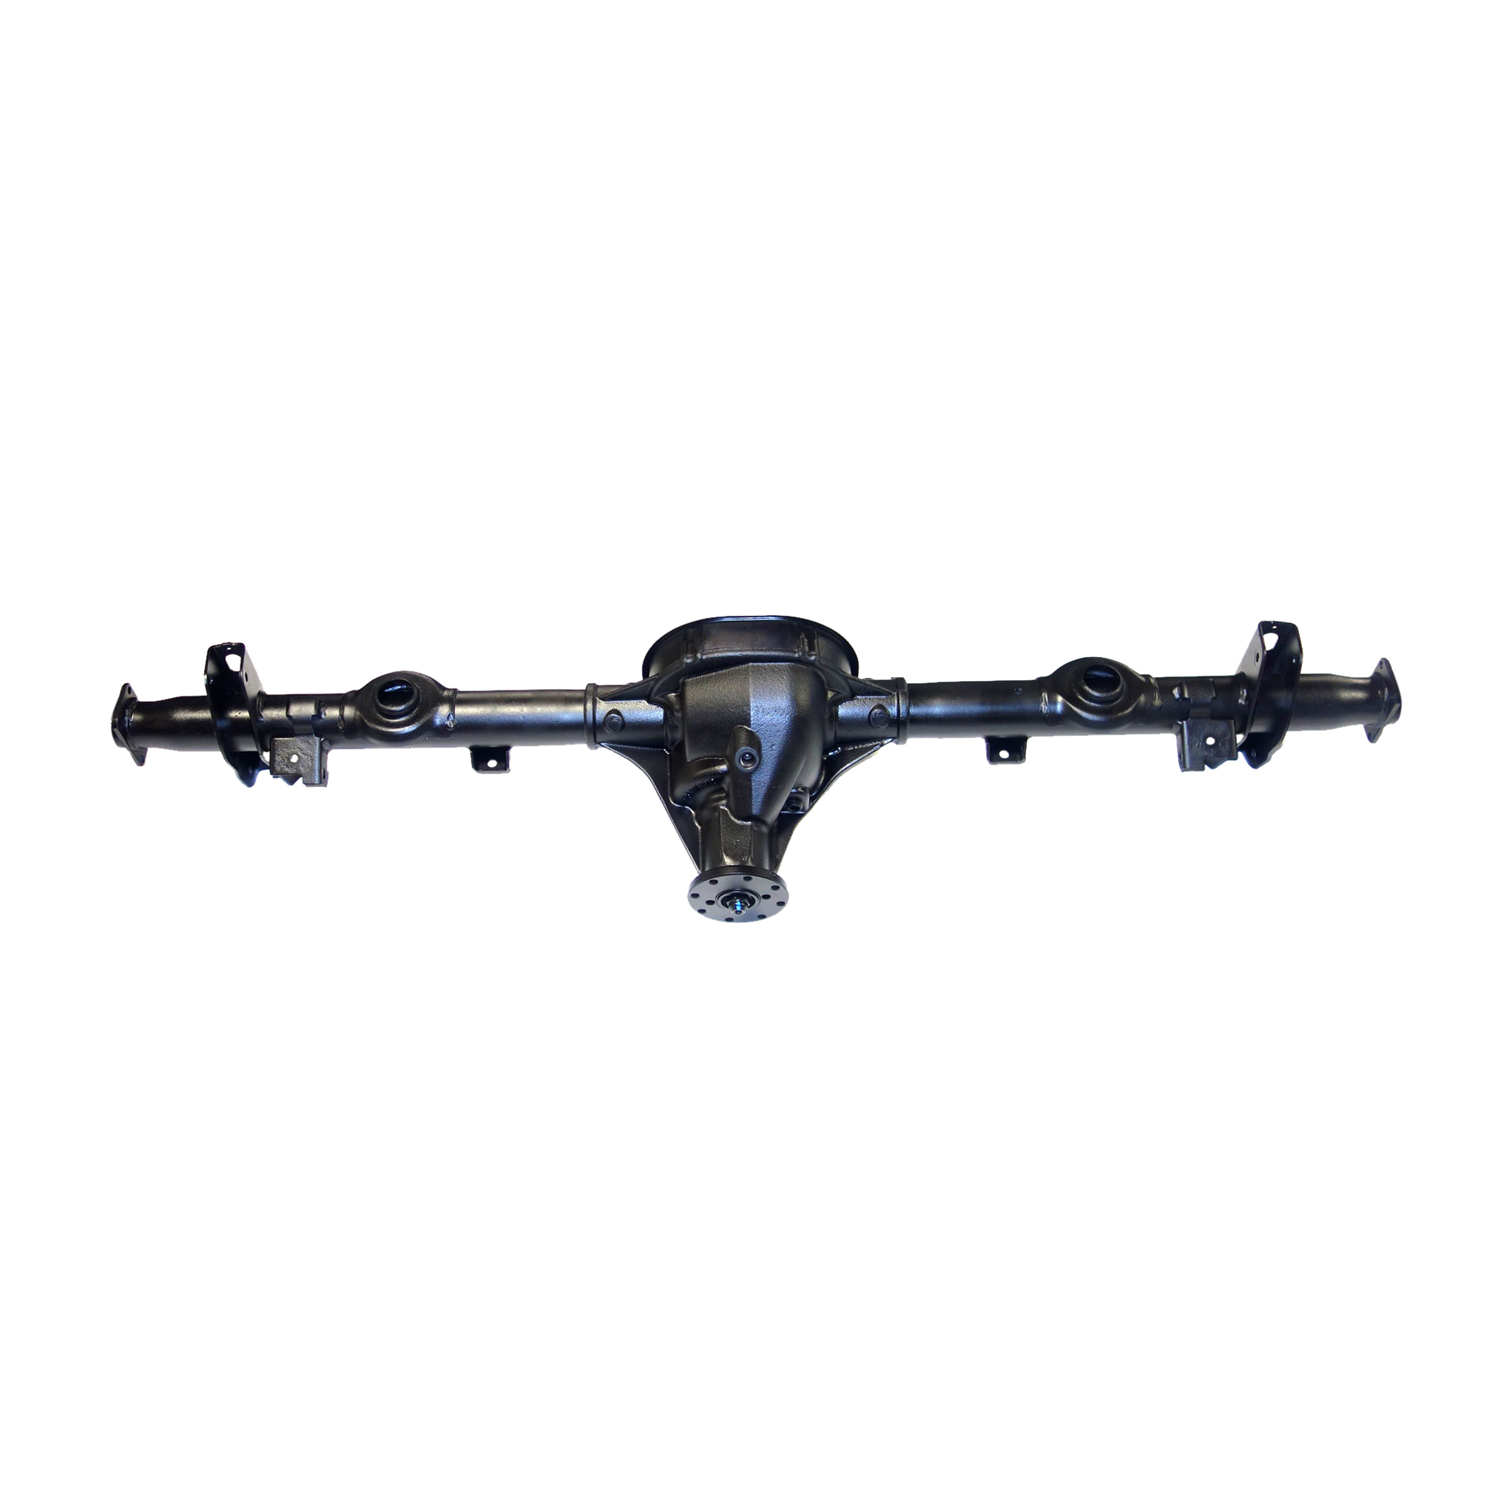 Remanufactured Axle Assy for 8.8" 01-02 Crown Vic, W/ABS, W/H&ling Package, 3.27 , Posi